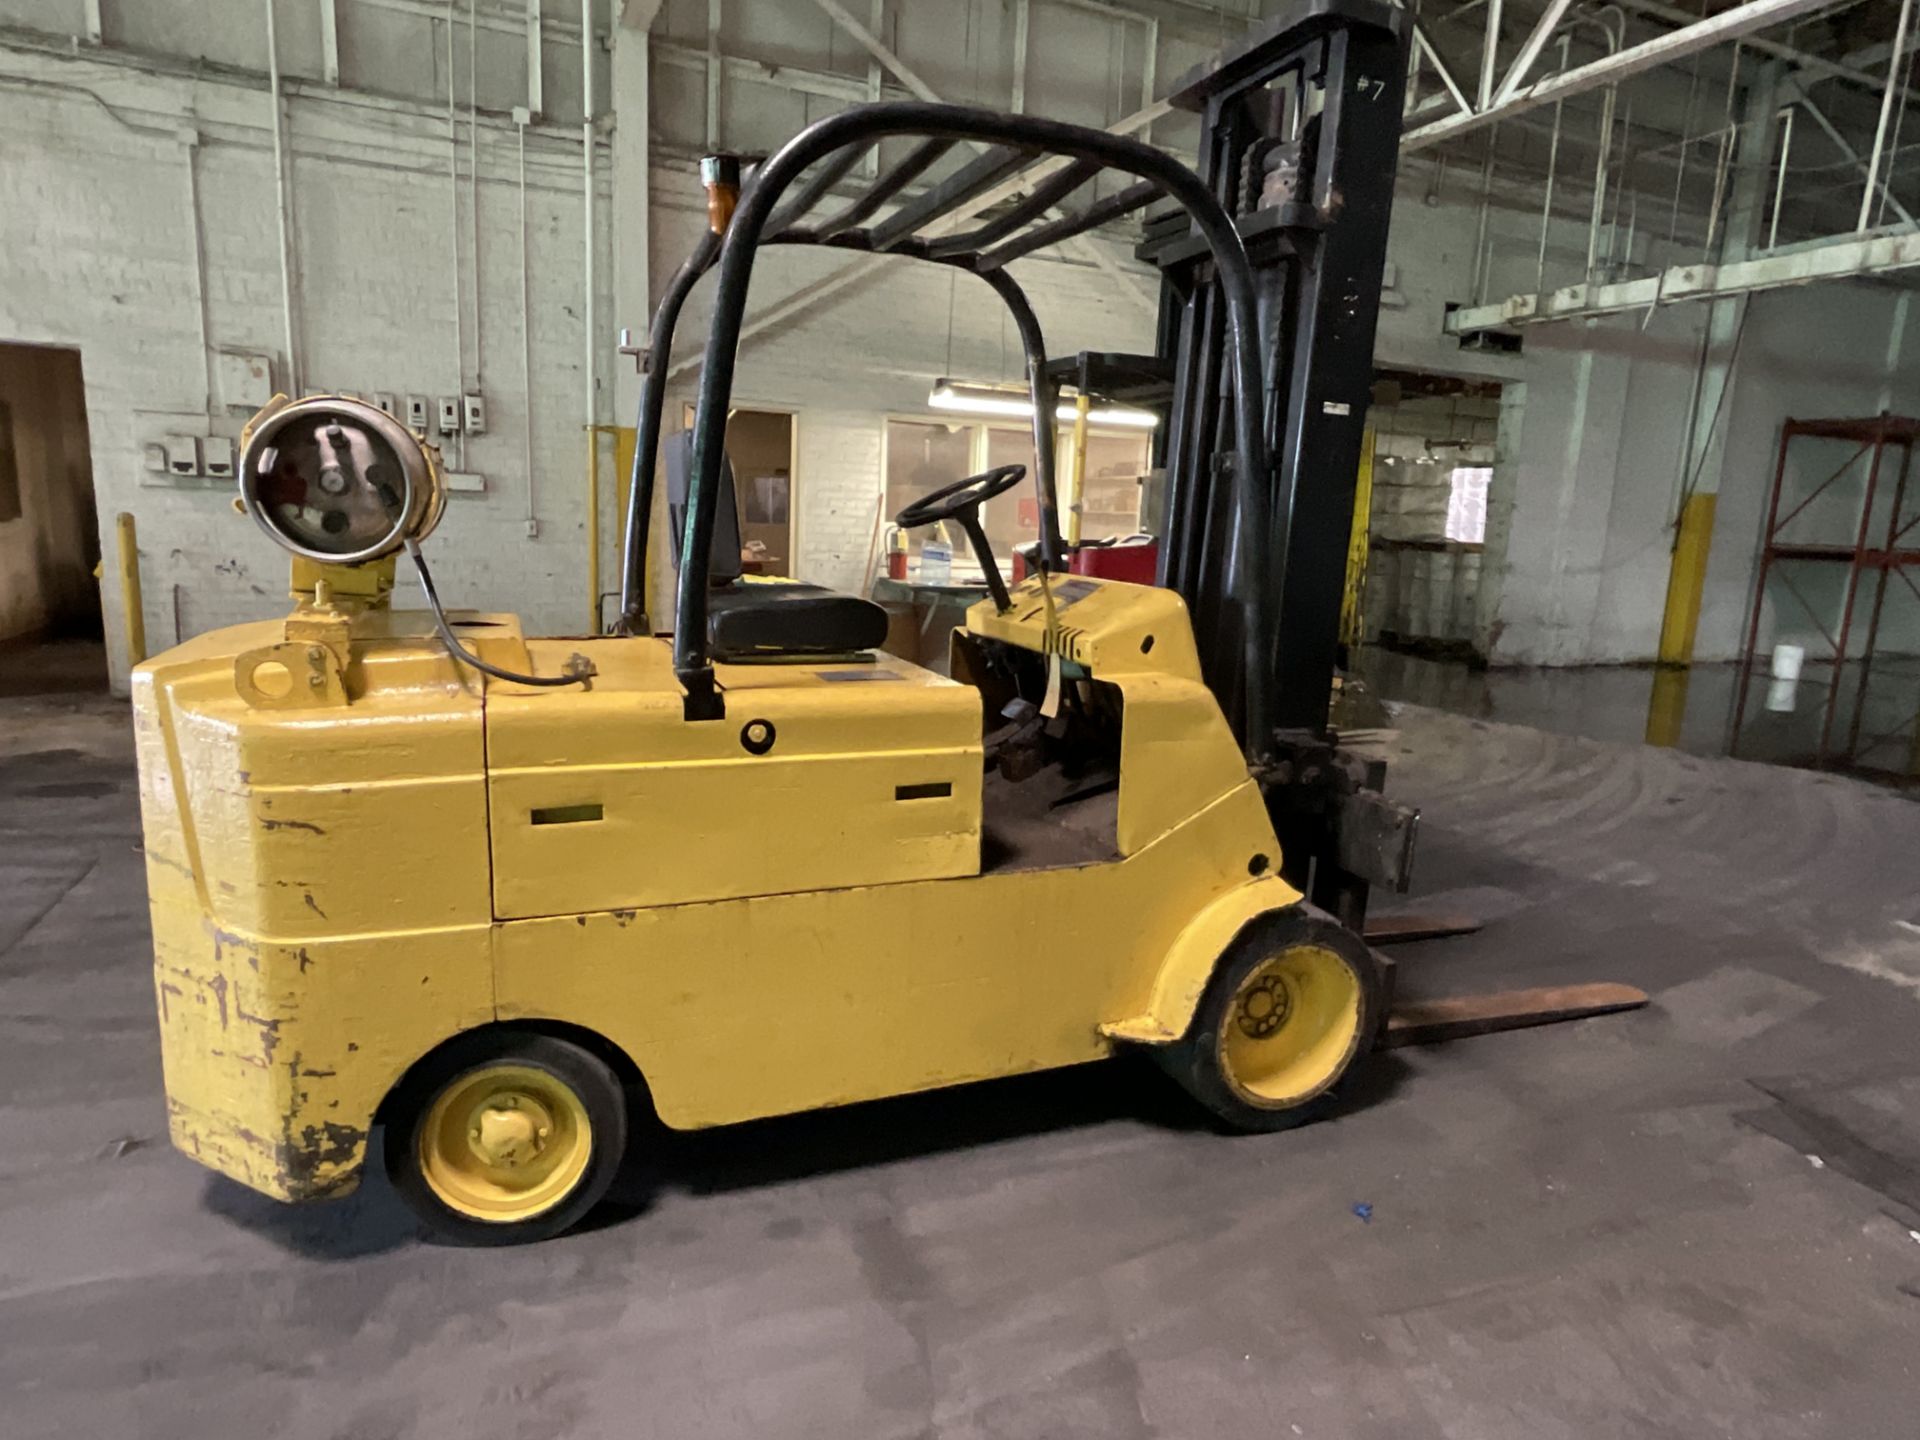 Caterpillar Forklift 12,000 lift , weight 15,090 model T120c 107” height 4 ft forks LP gas - Image 5 of 14